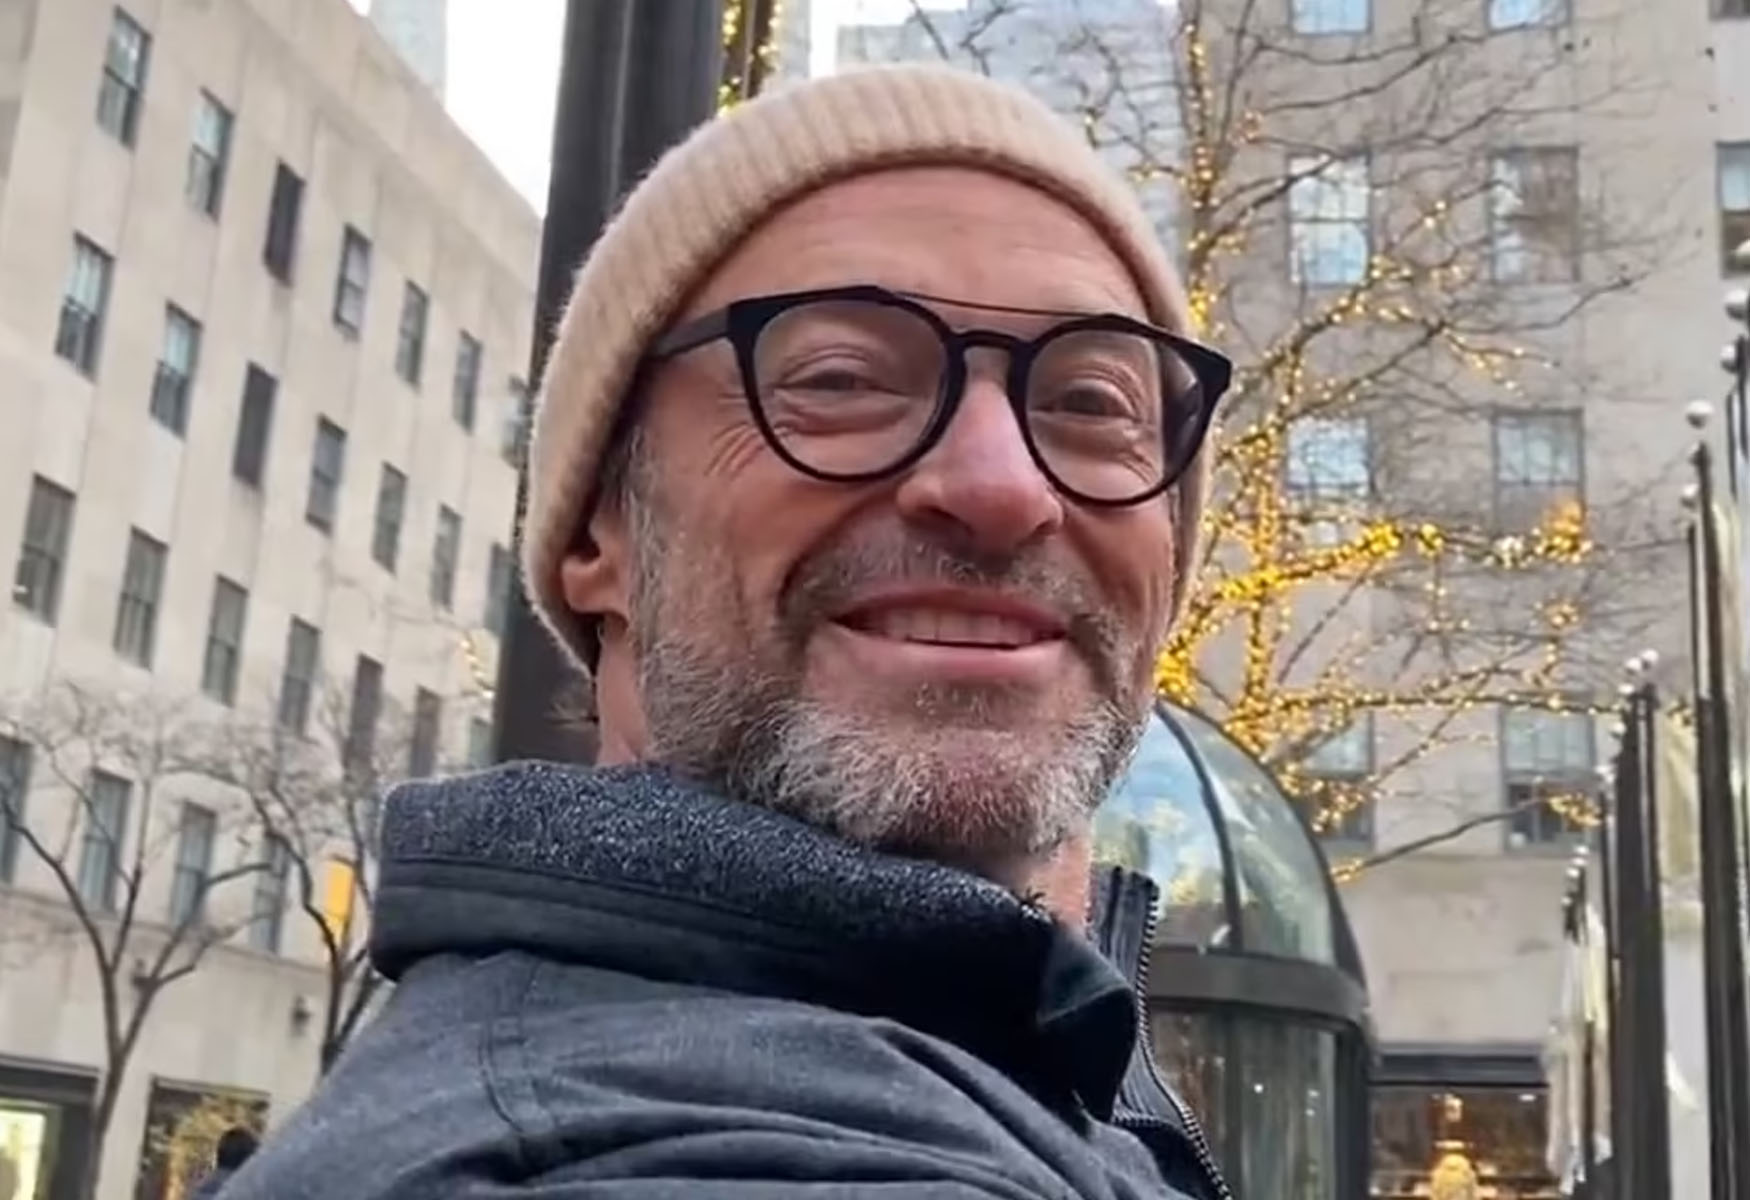 Hugh Jackman Warned By Security Guard For Breaching Barrier At Rockefeller Center